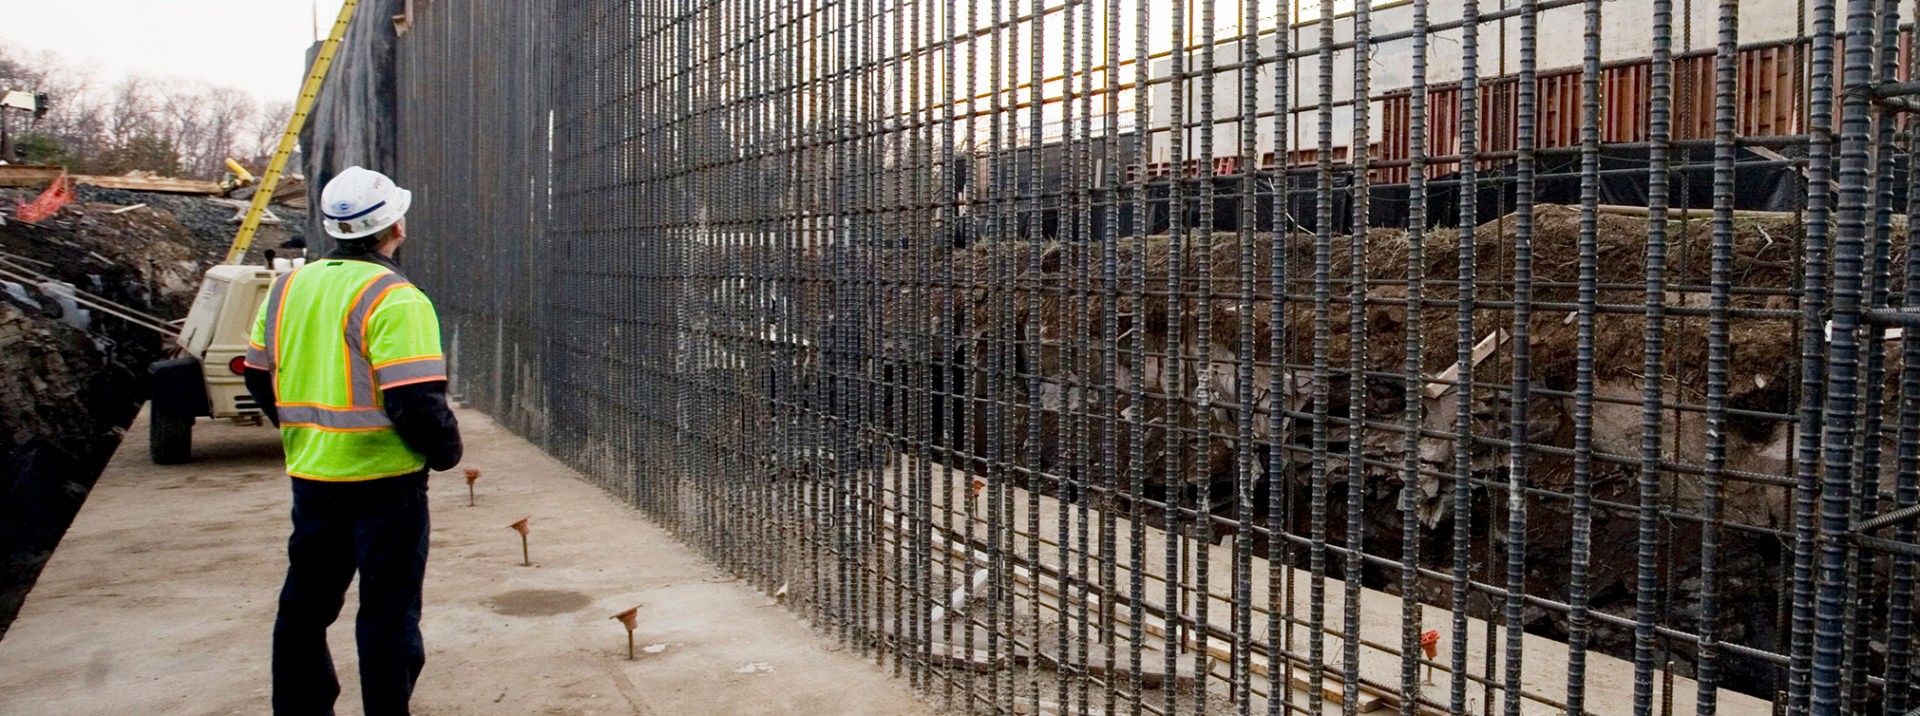 Rebar lined up on wall while employee examines